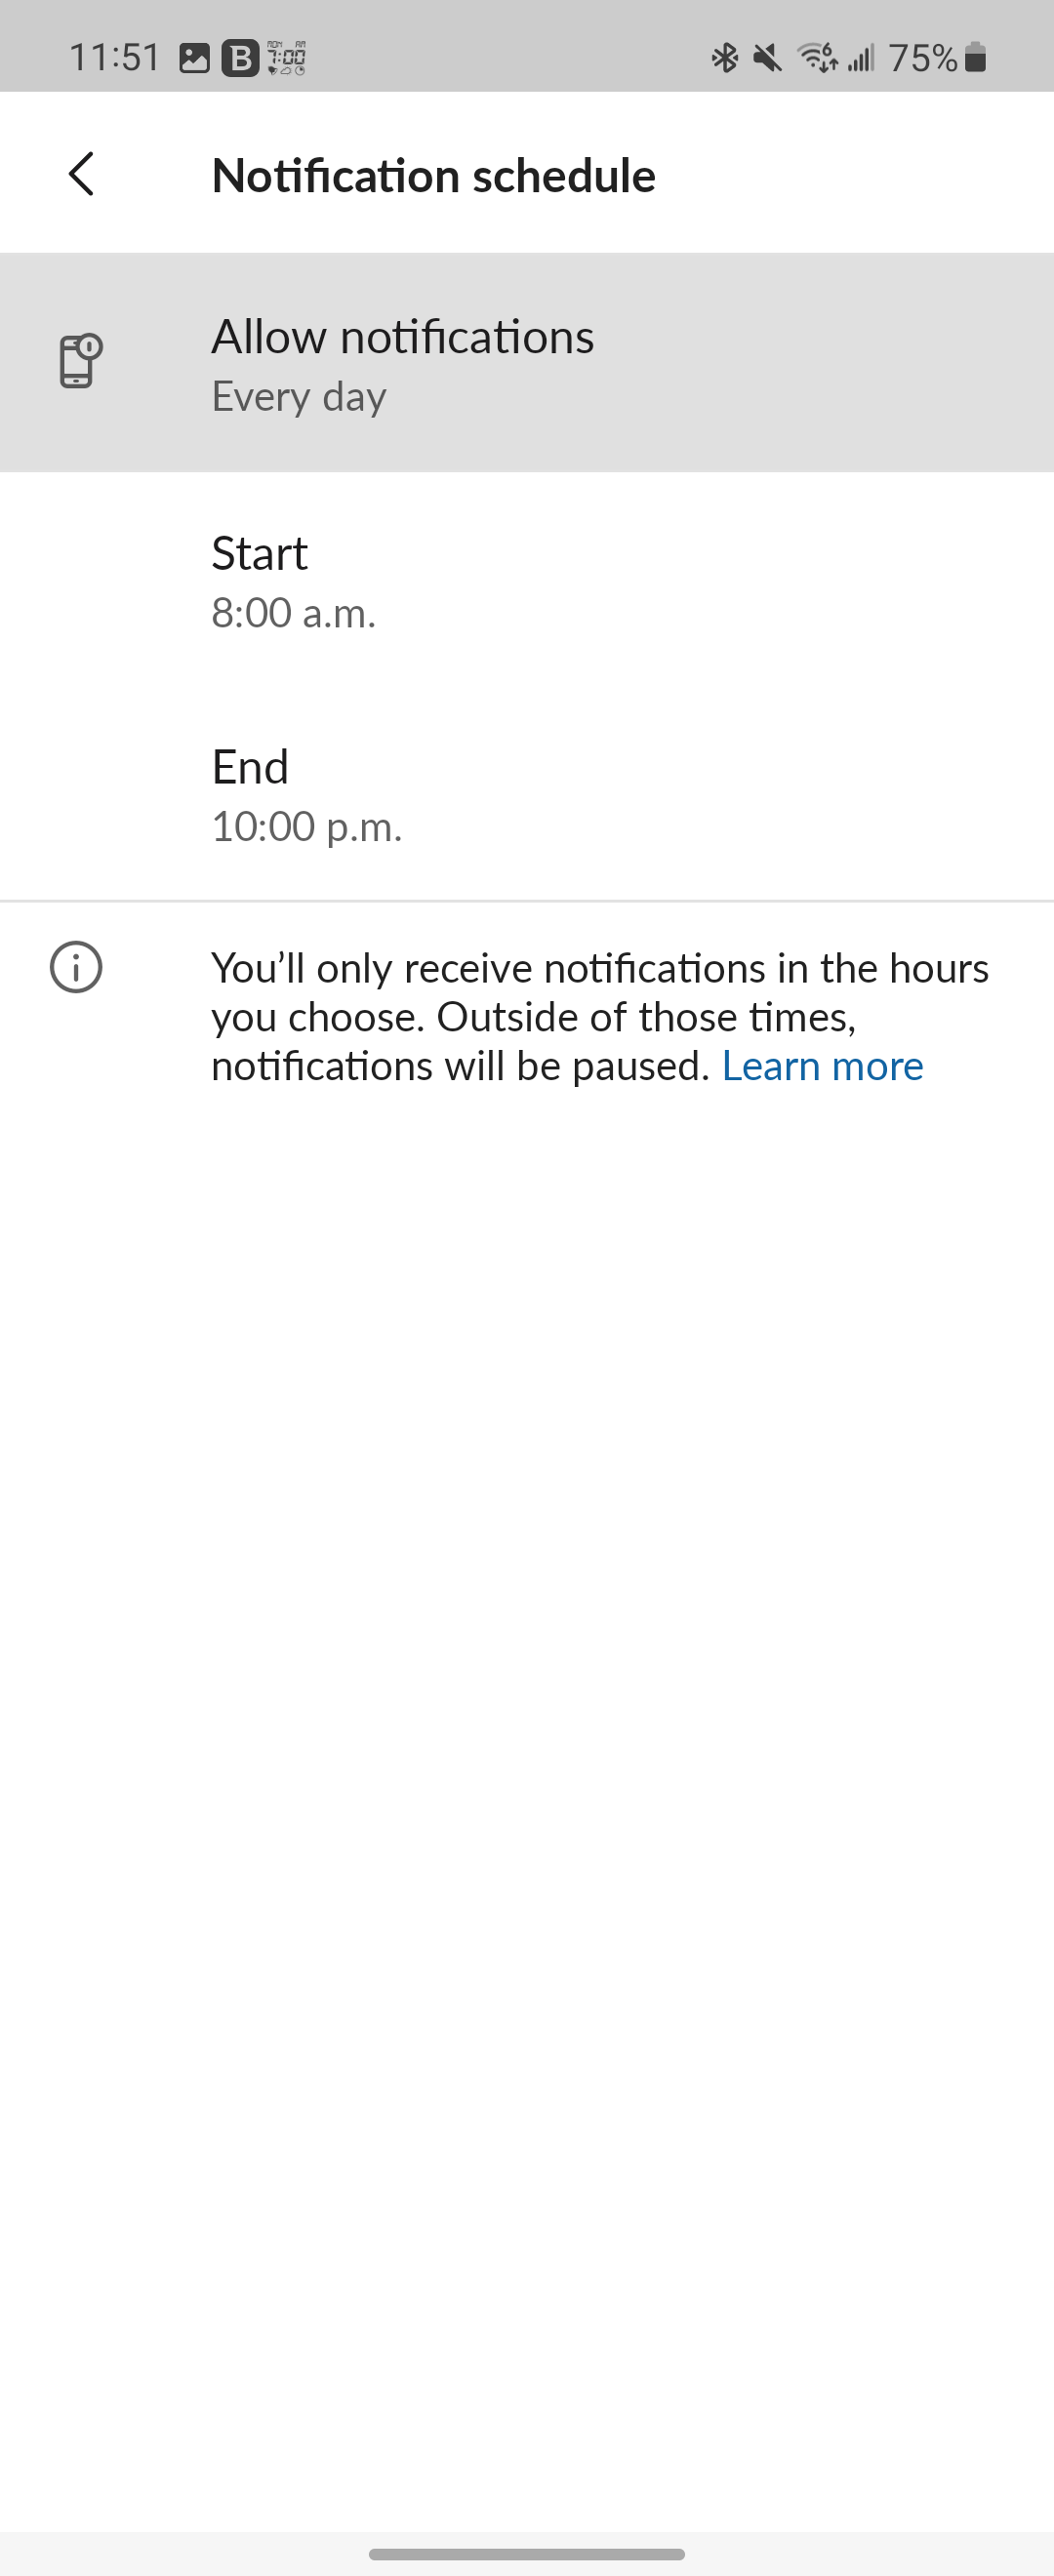 Slack notification schedule settings with Allow notifications highlighted